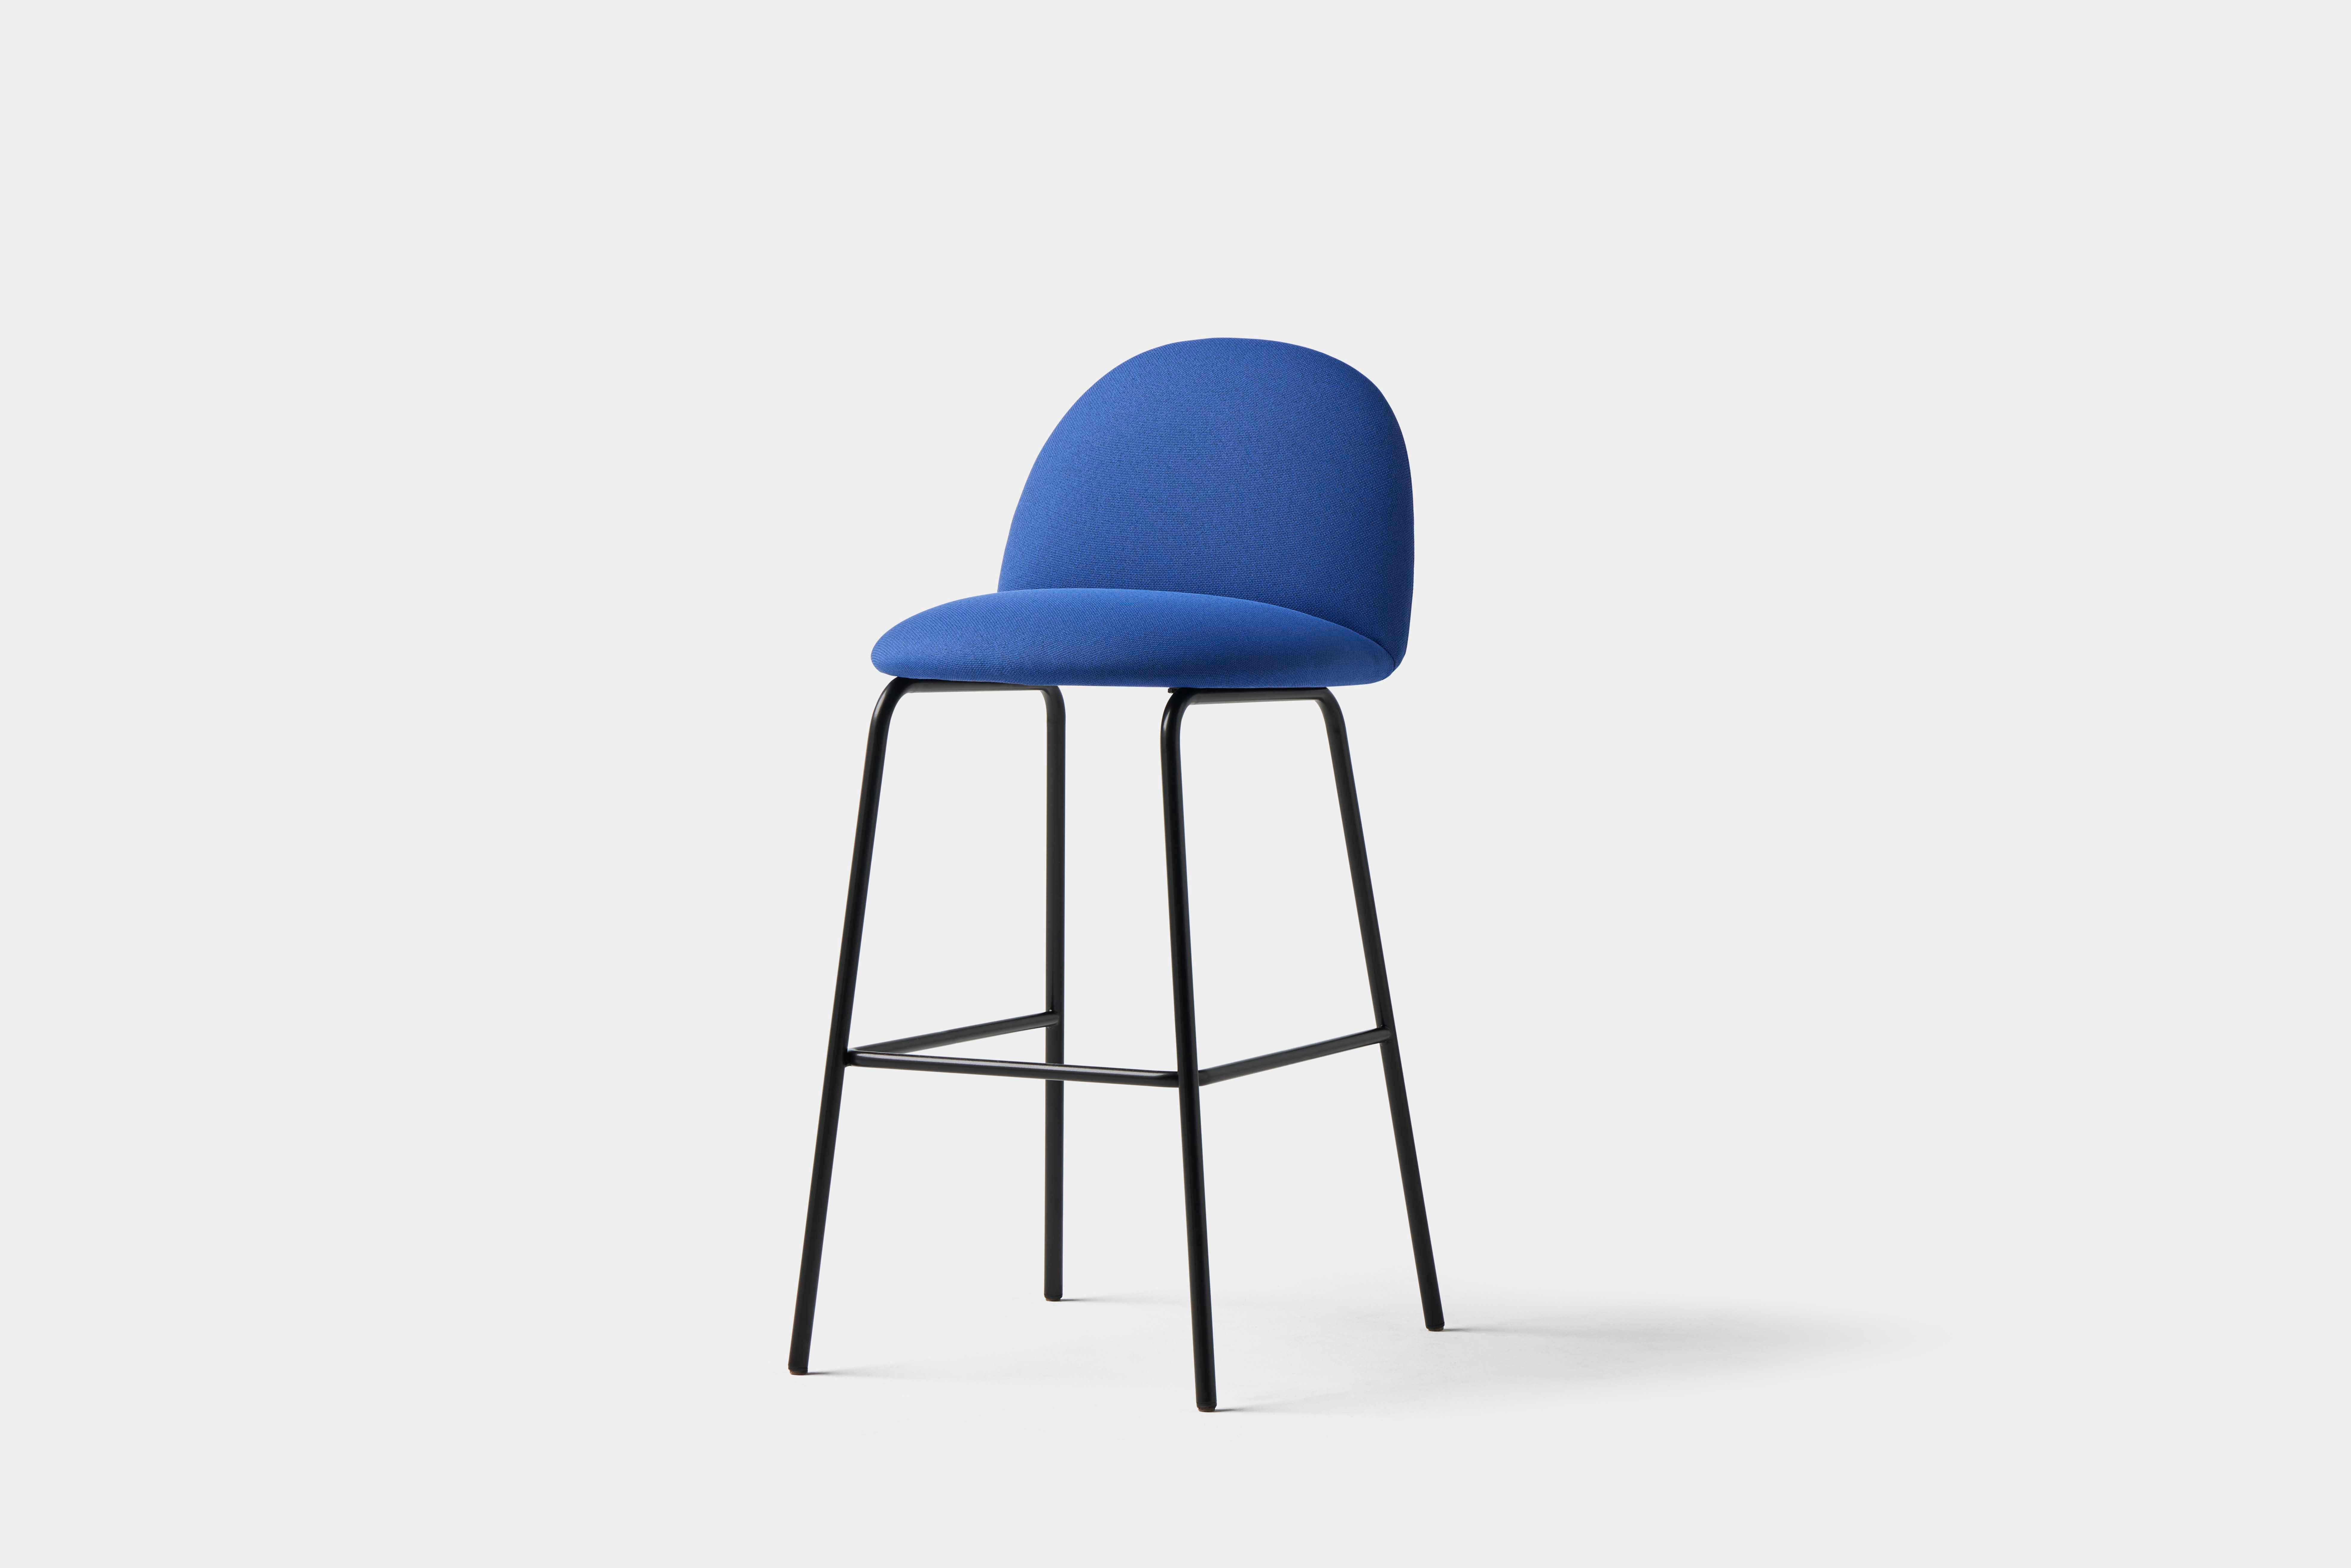 Terra bar stool by Pepe Albargues
Dimensions: W 49 x D 61 x H 104 x Seat 79.
Materials: Black painted iron frame and legs for others colours. Foam CMHR (high resilience and flame retardant) for all our cushion filling systems. Seat and backrest in